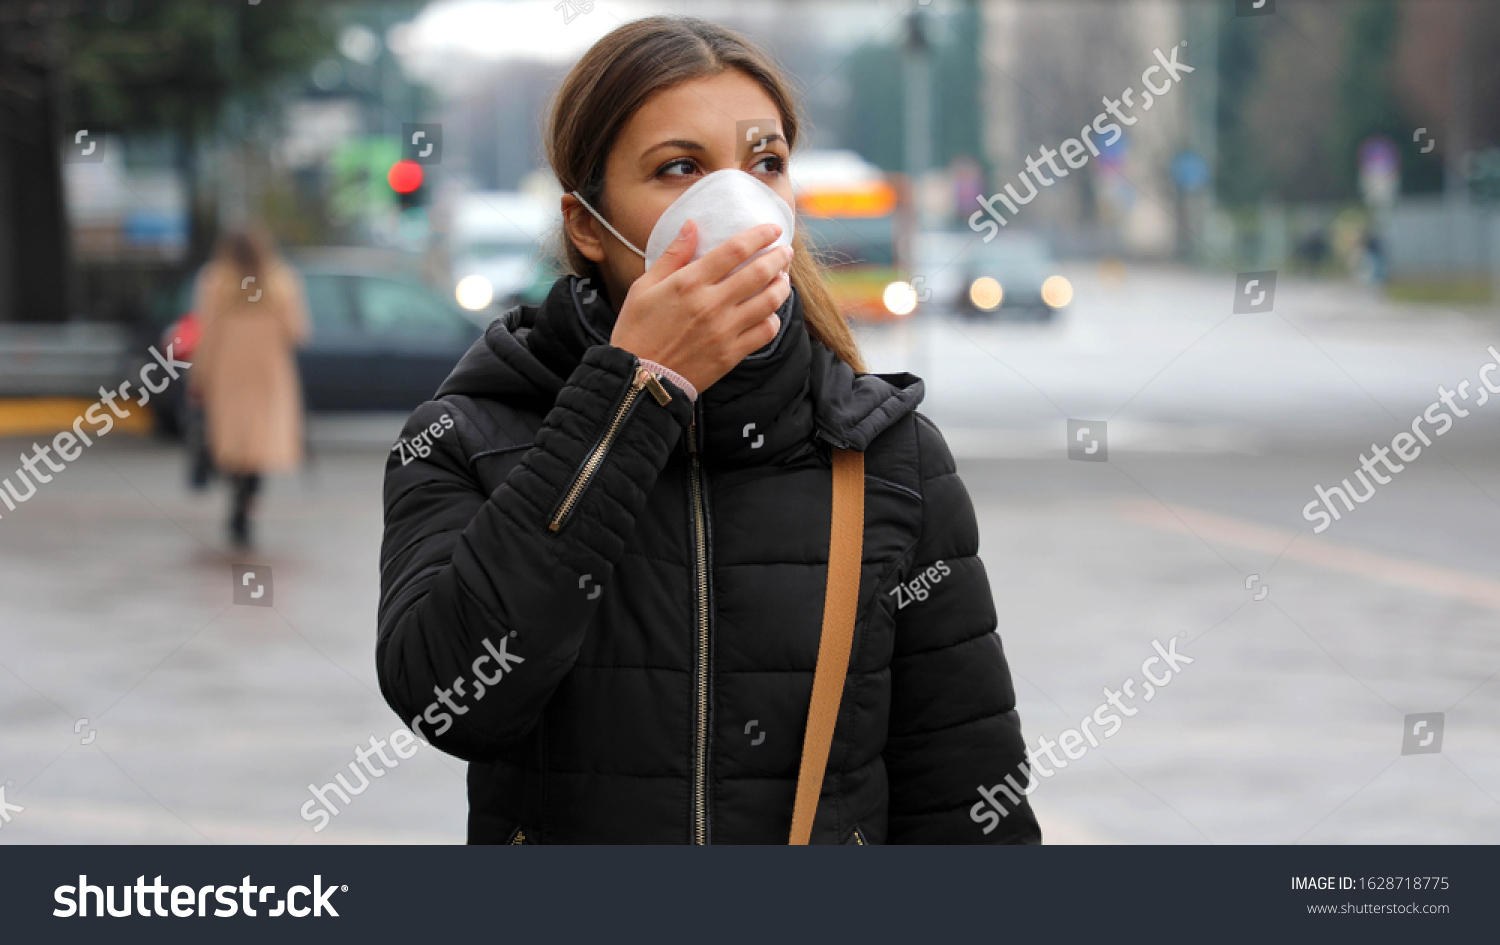 COVID-19 Pandemic Coronavirus Woman in city street wearing protective face mask for spreading of disease virus SARS-CoV-2. Girl with protective mask on face against Coronavirus Disease 2019. #1628718775